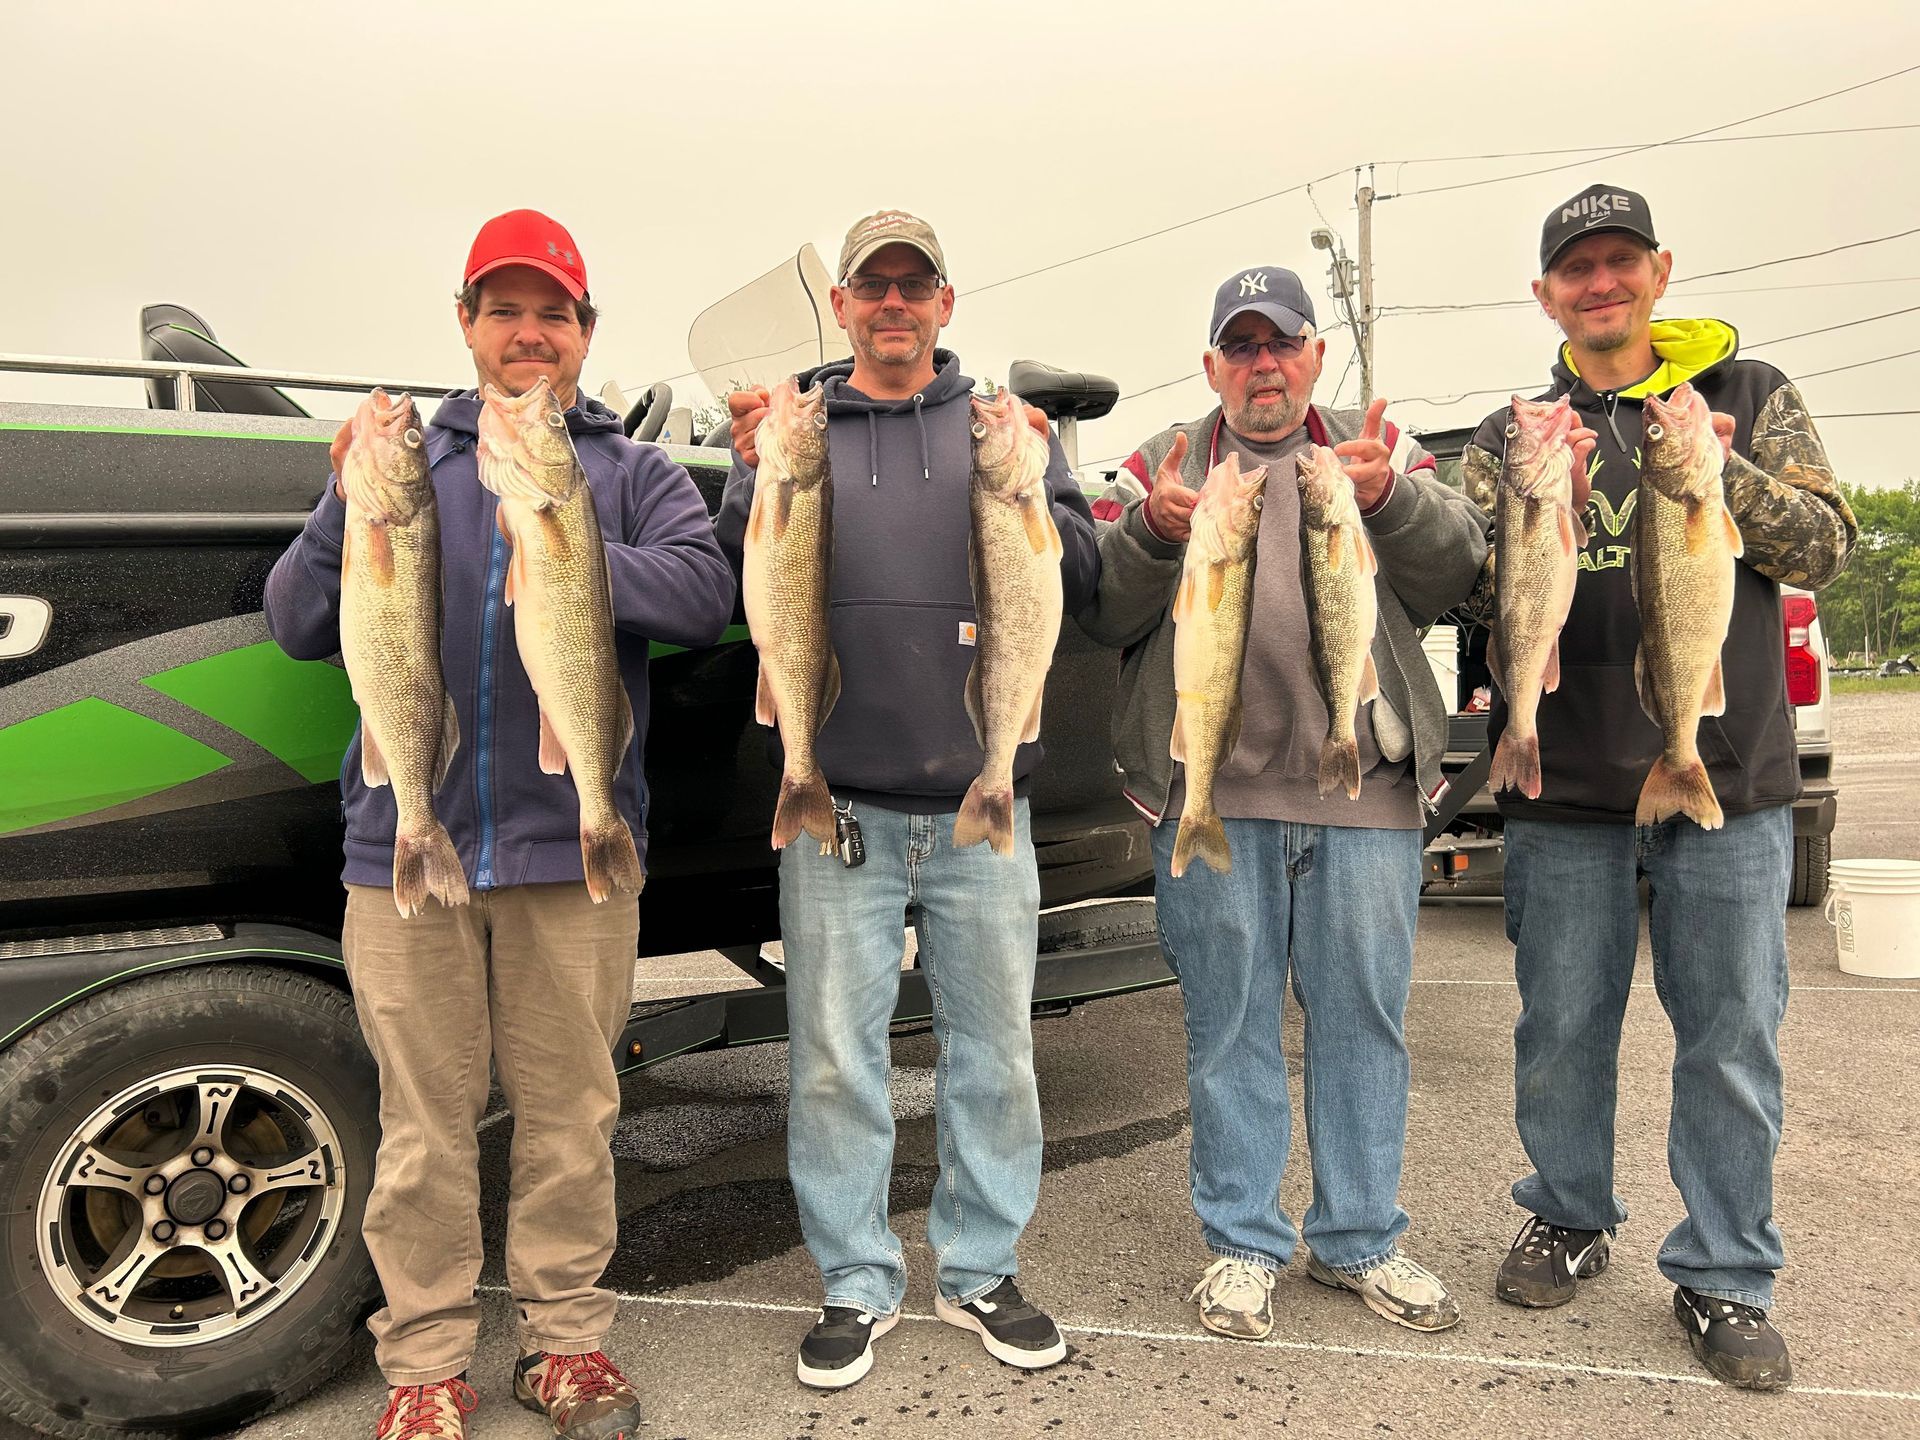 group of men standing in front of a boat holding caught Walleye fish